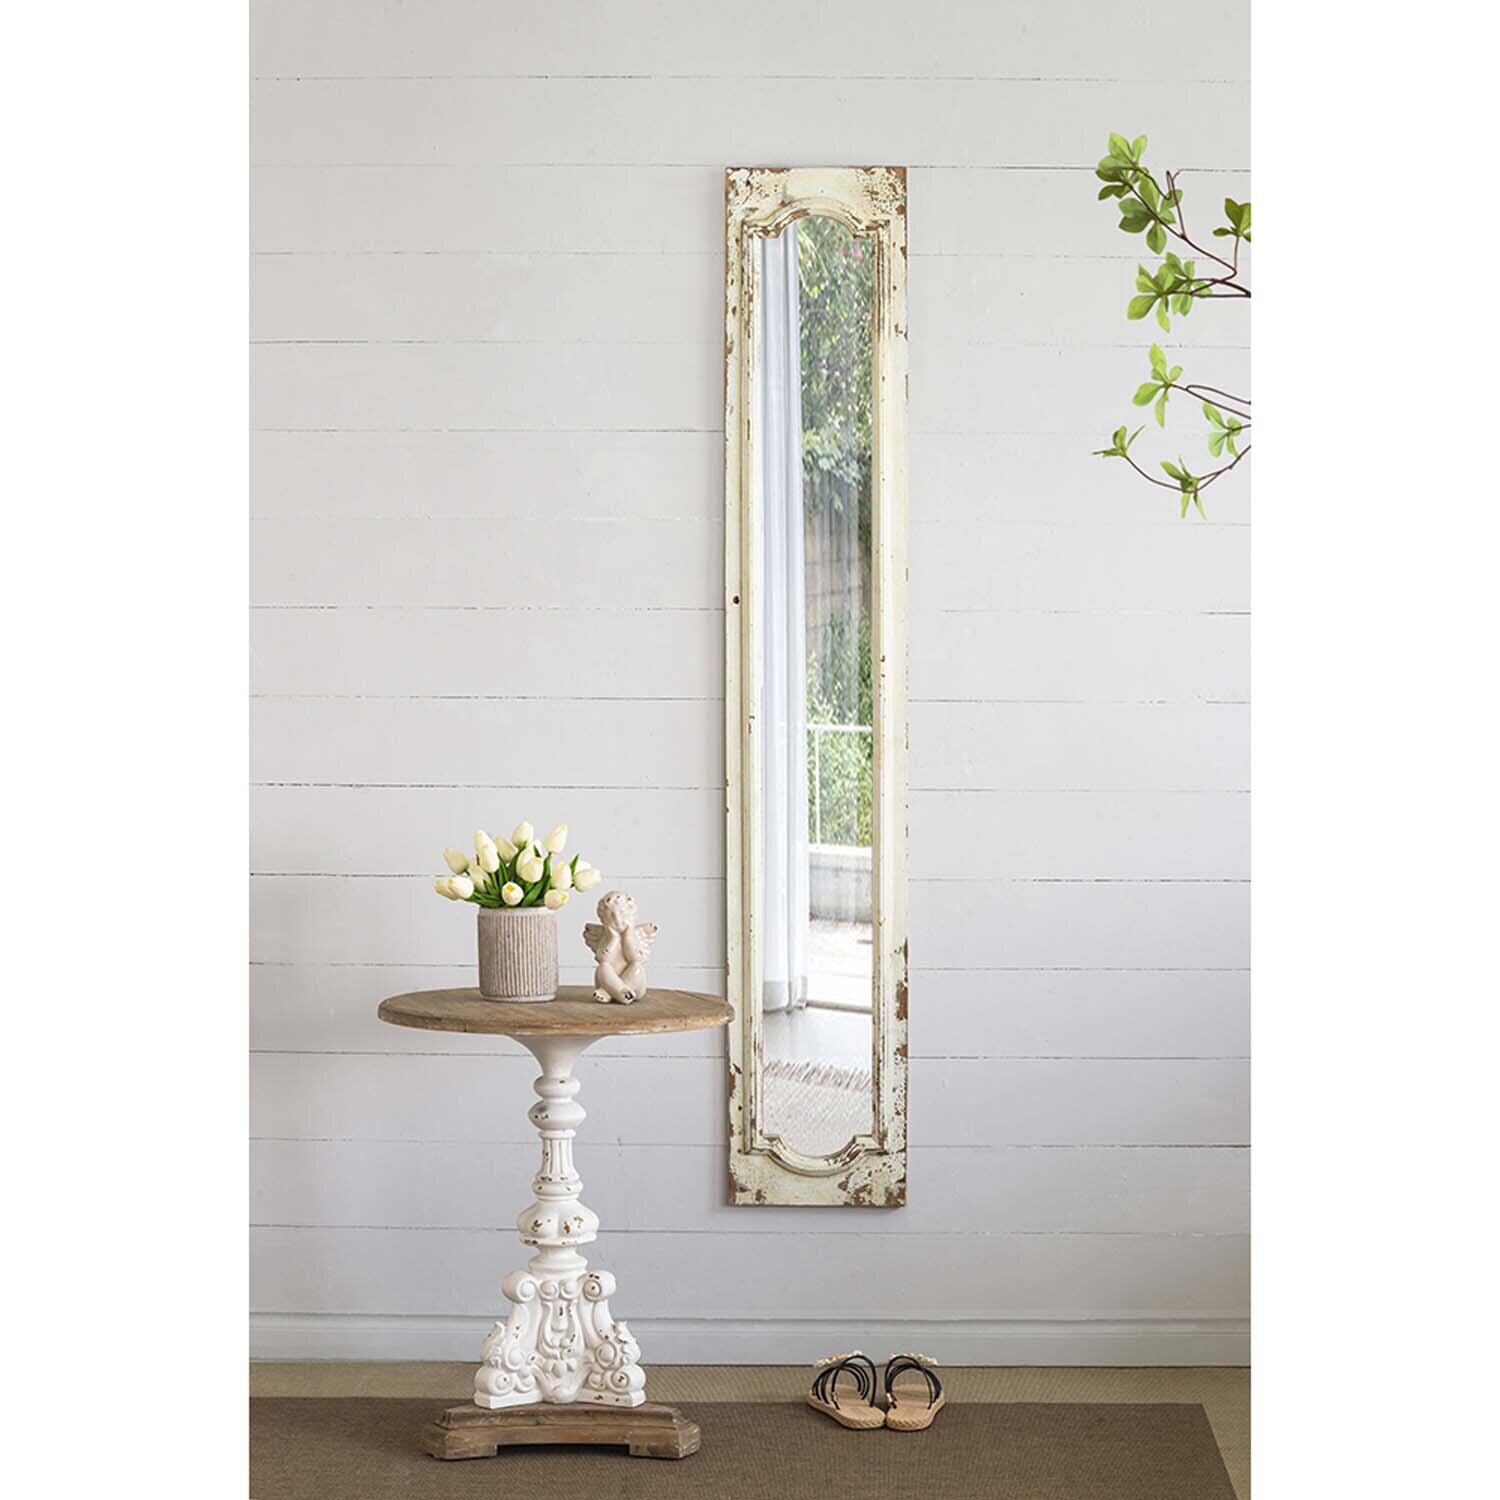 Only 180.00 usd for Ophelia Solid Oak Full Length Arch Mirror Online at the  Shop